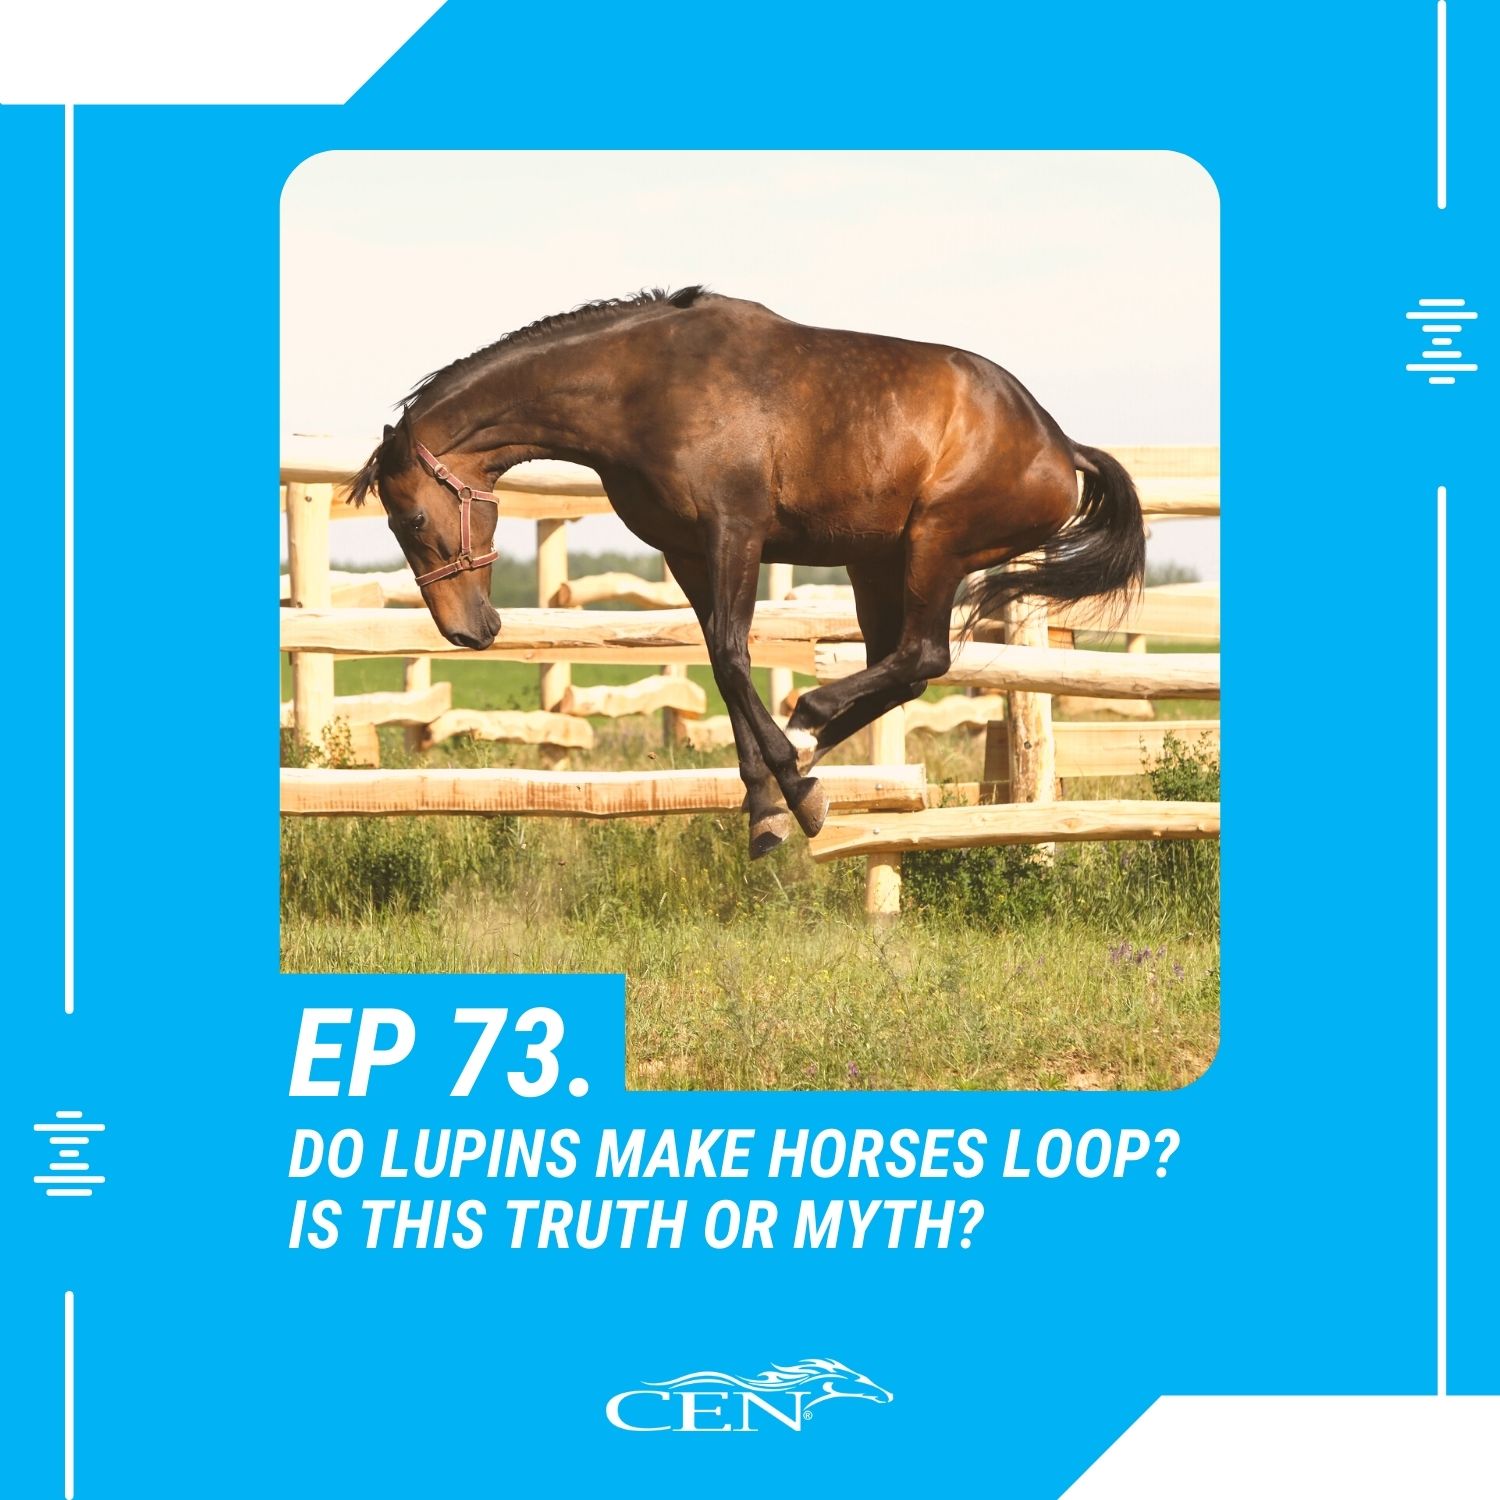 DO LUPINS MAKE HORSES LOOP Is this truth or myth